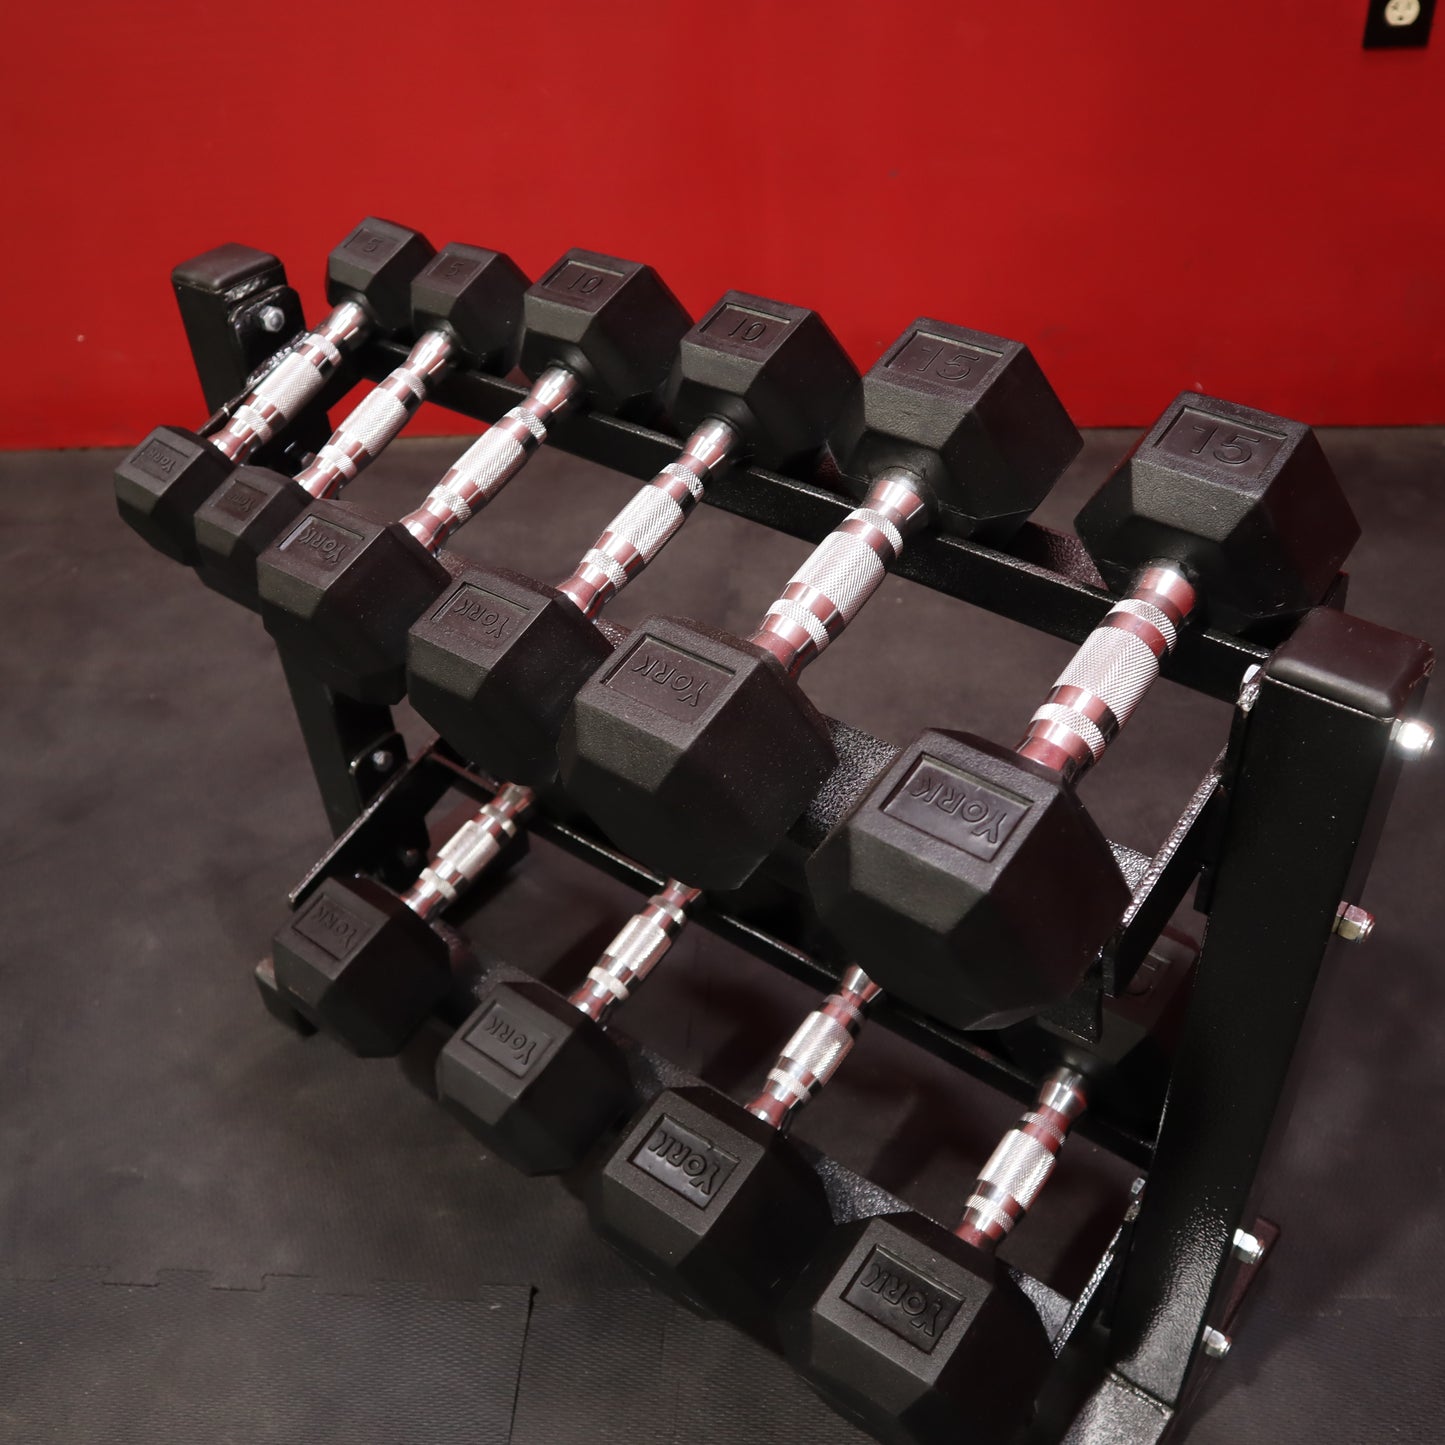 York 5-25lb Rubber Hex Dumbbell Set w/ Dumbbell Stand (Nuevo)